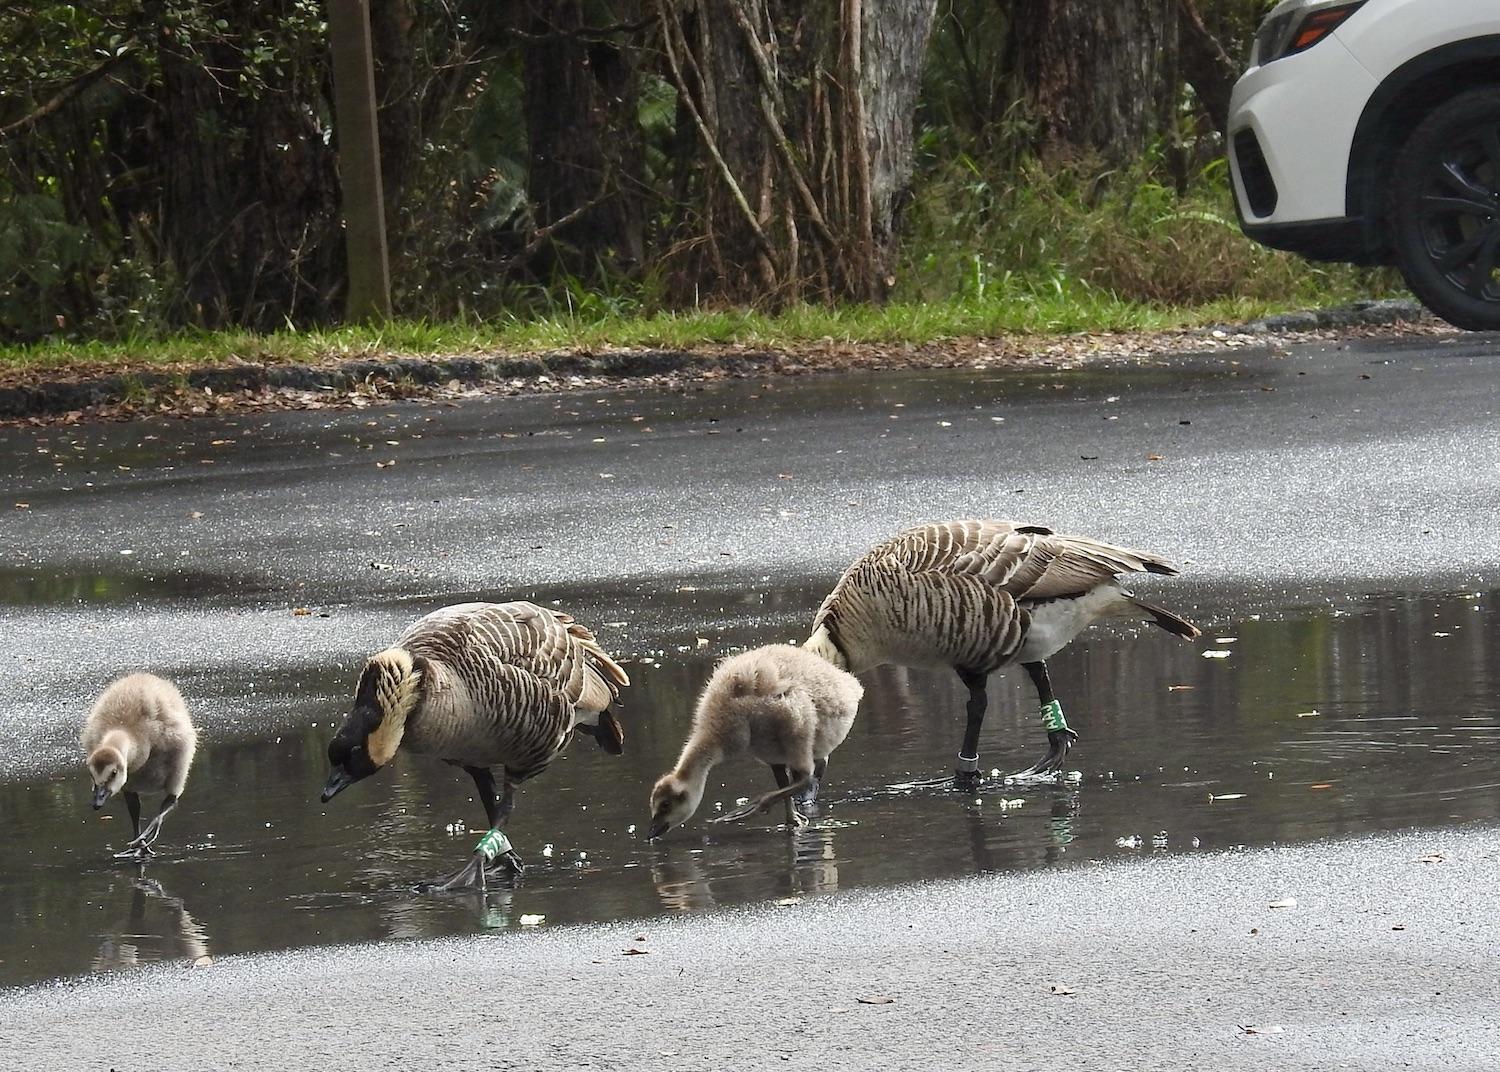 This nēnē family wanders a parking lot in Hawai'i Volcanoes National Park in February during a summit eruption.